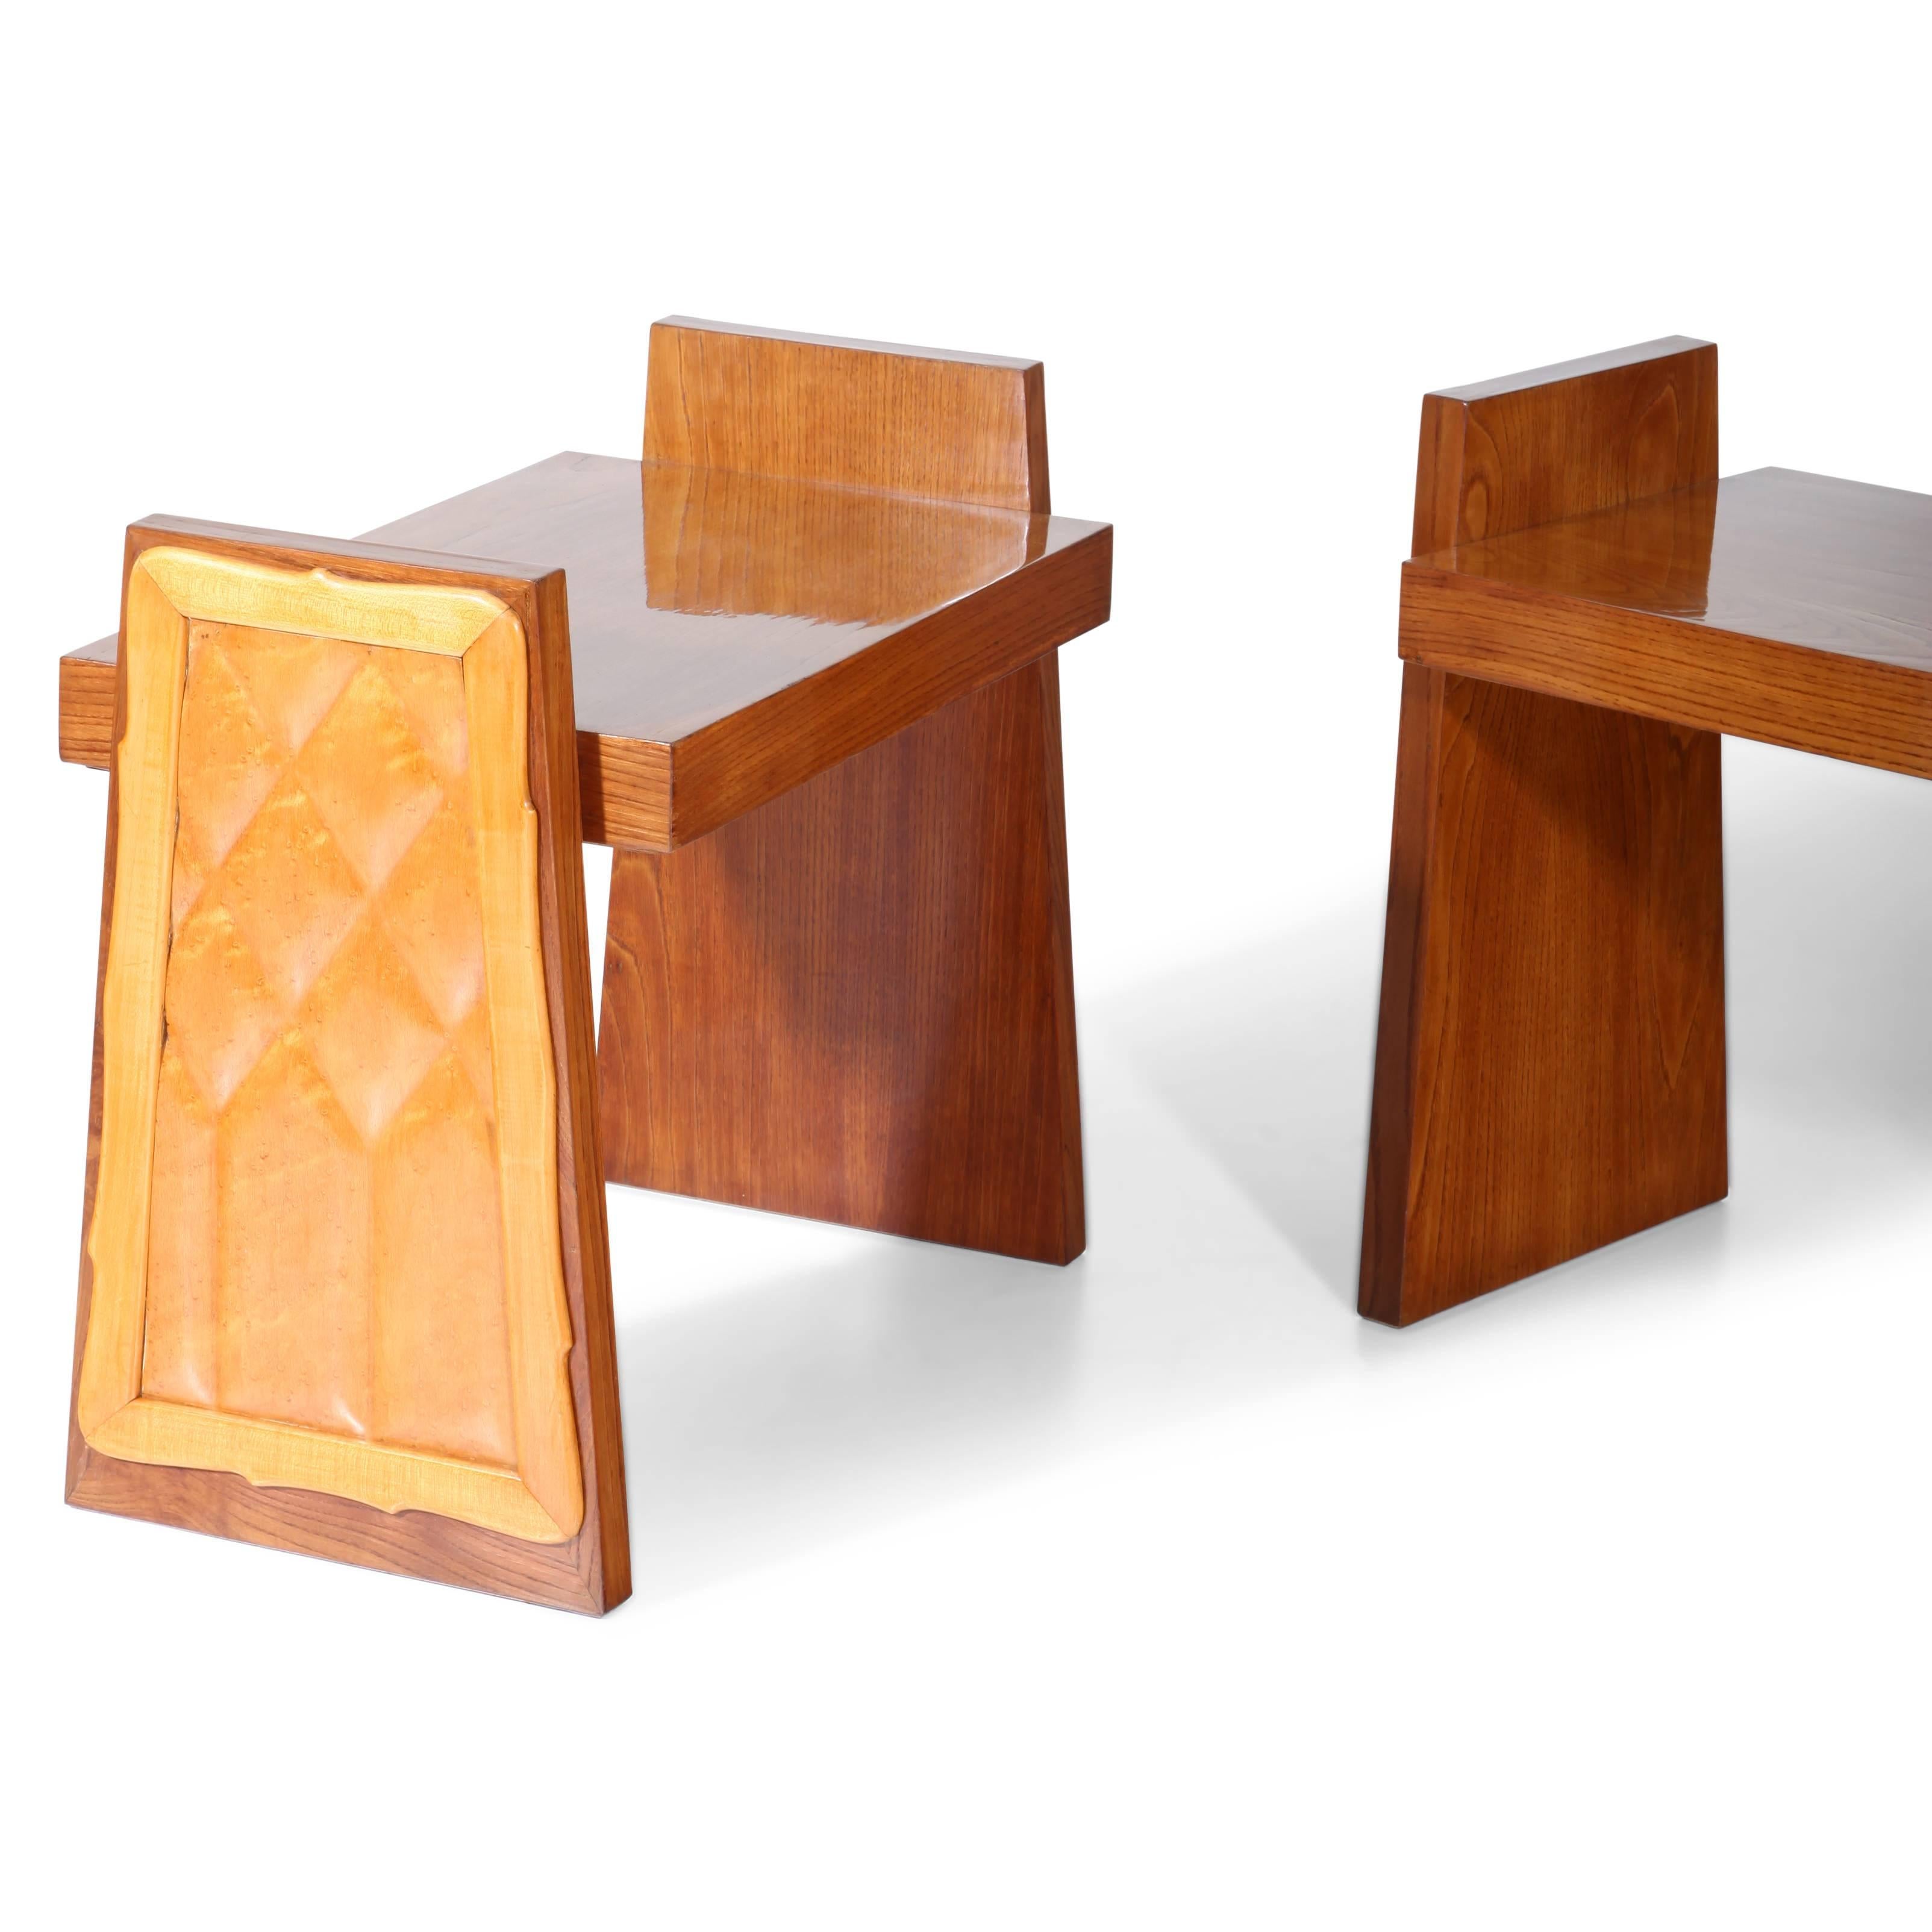 Pair of Italian midcentury stools or small benches, standing on trapezoidal legs with a framed and stepped décor panel.